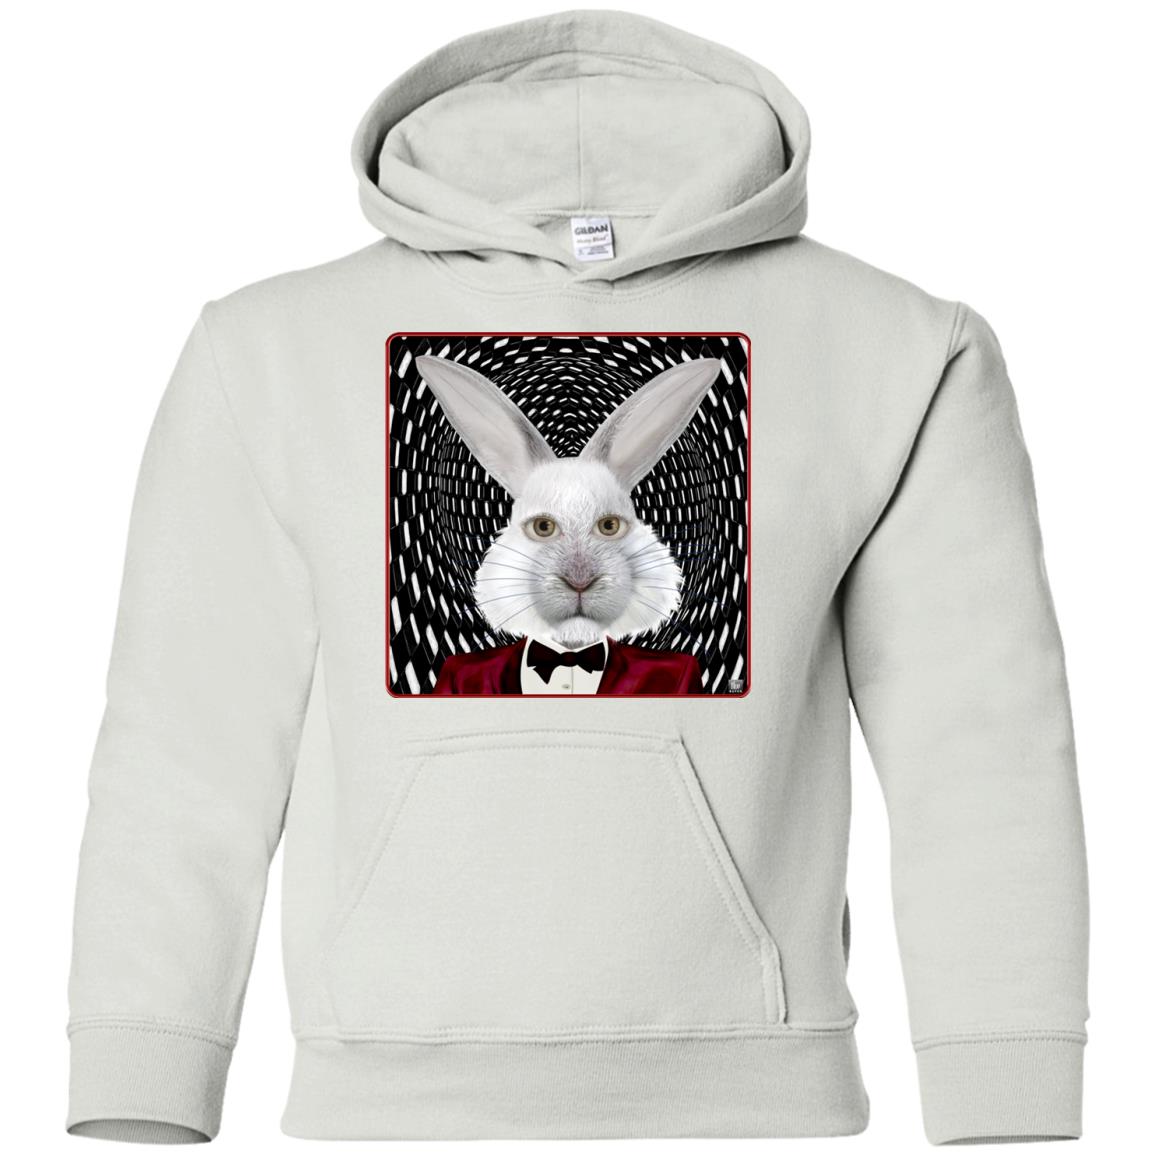 the white rabbit - Youth Hoodie